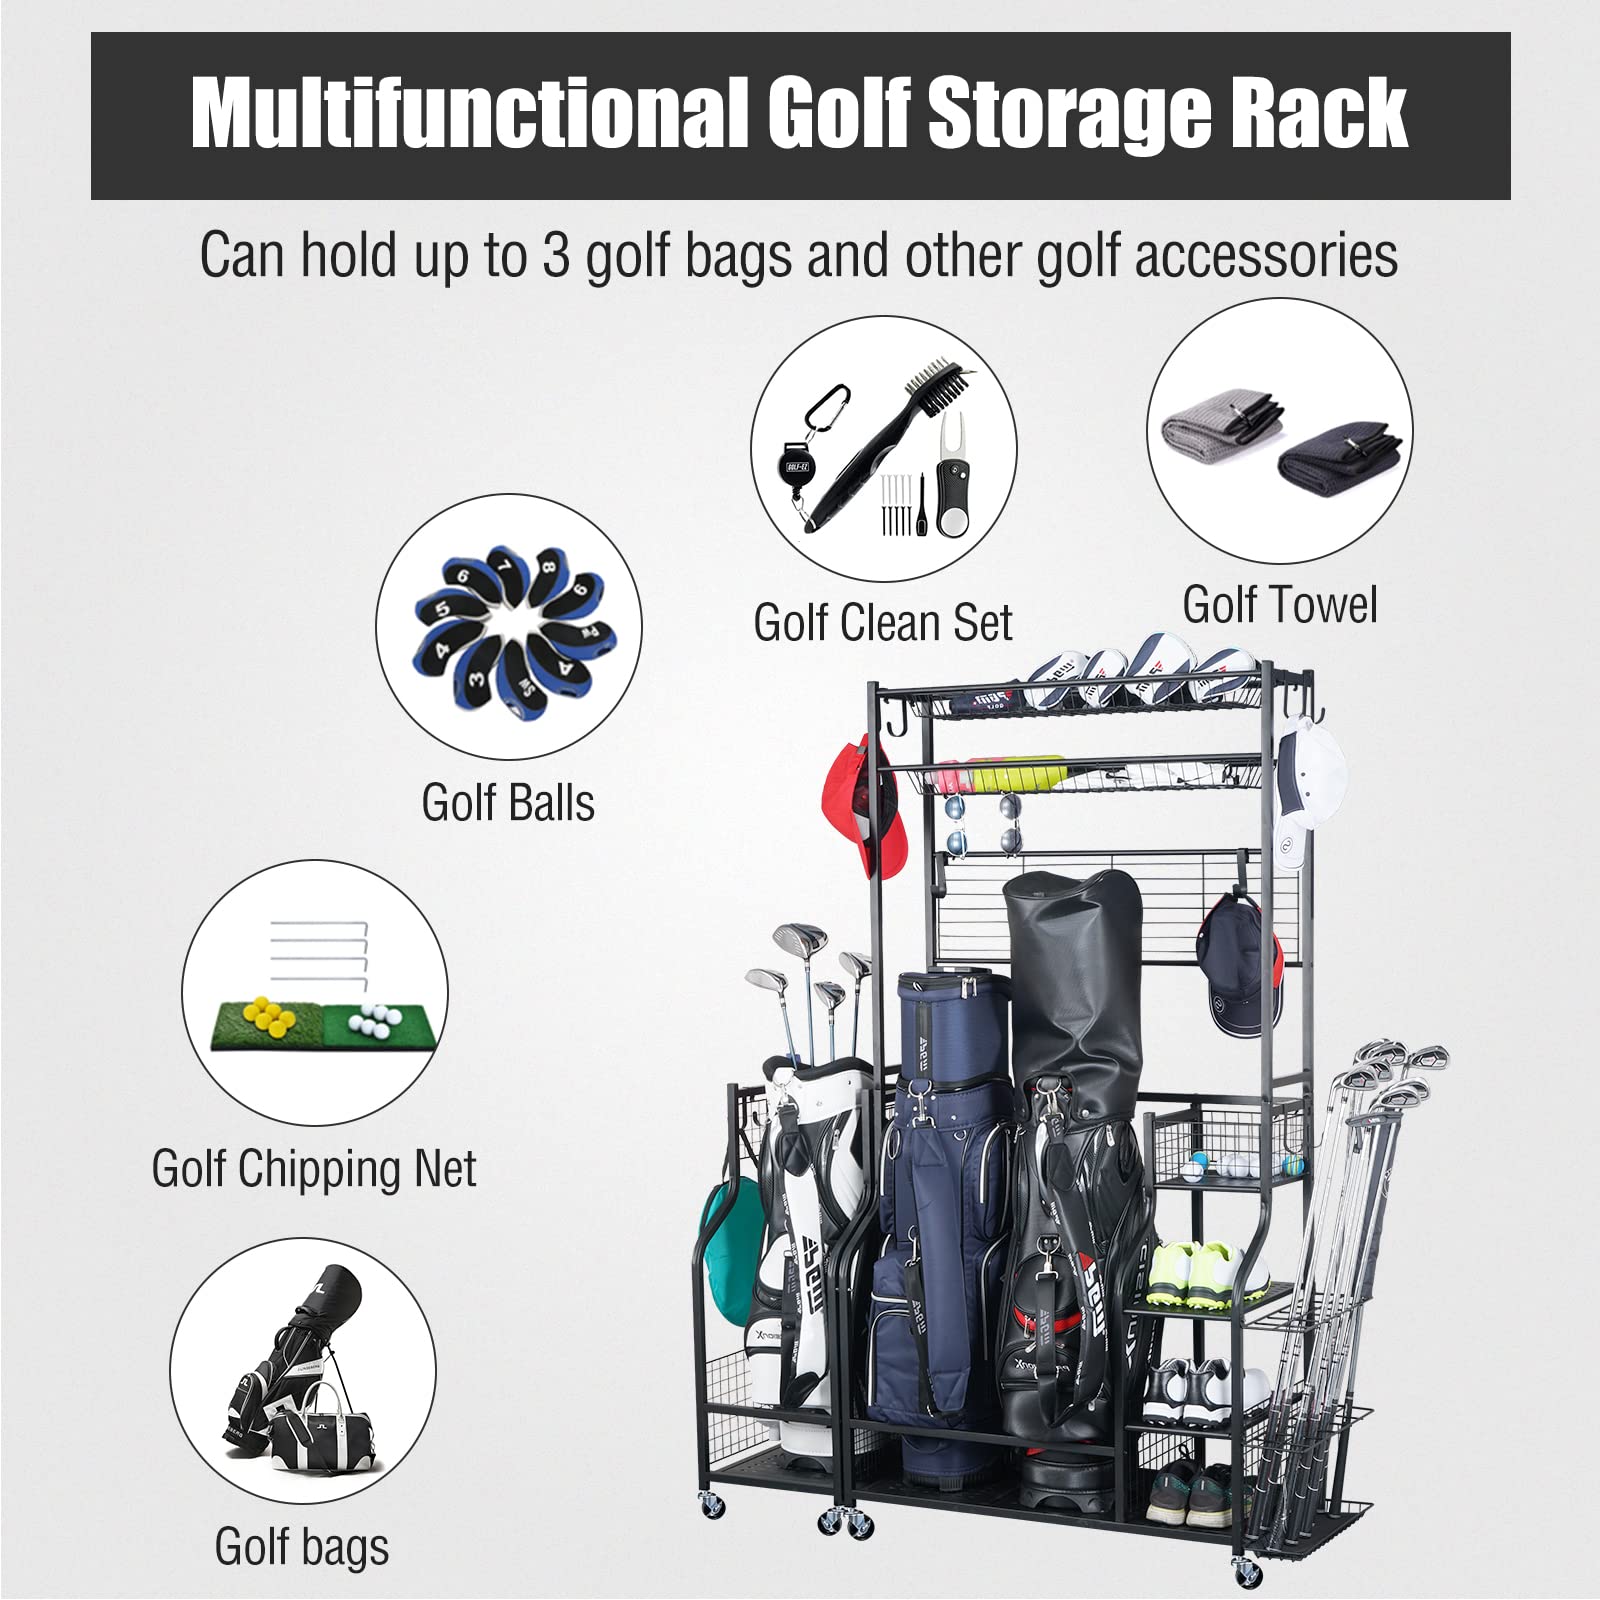 Mythinglogic Golf club Rack for Garage with Extra Golf Bag Rack and Top Organizer, Best Gift for Golfers